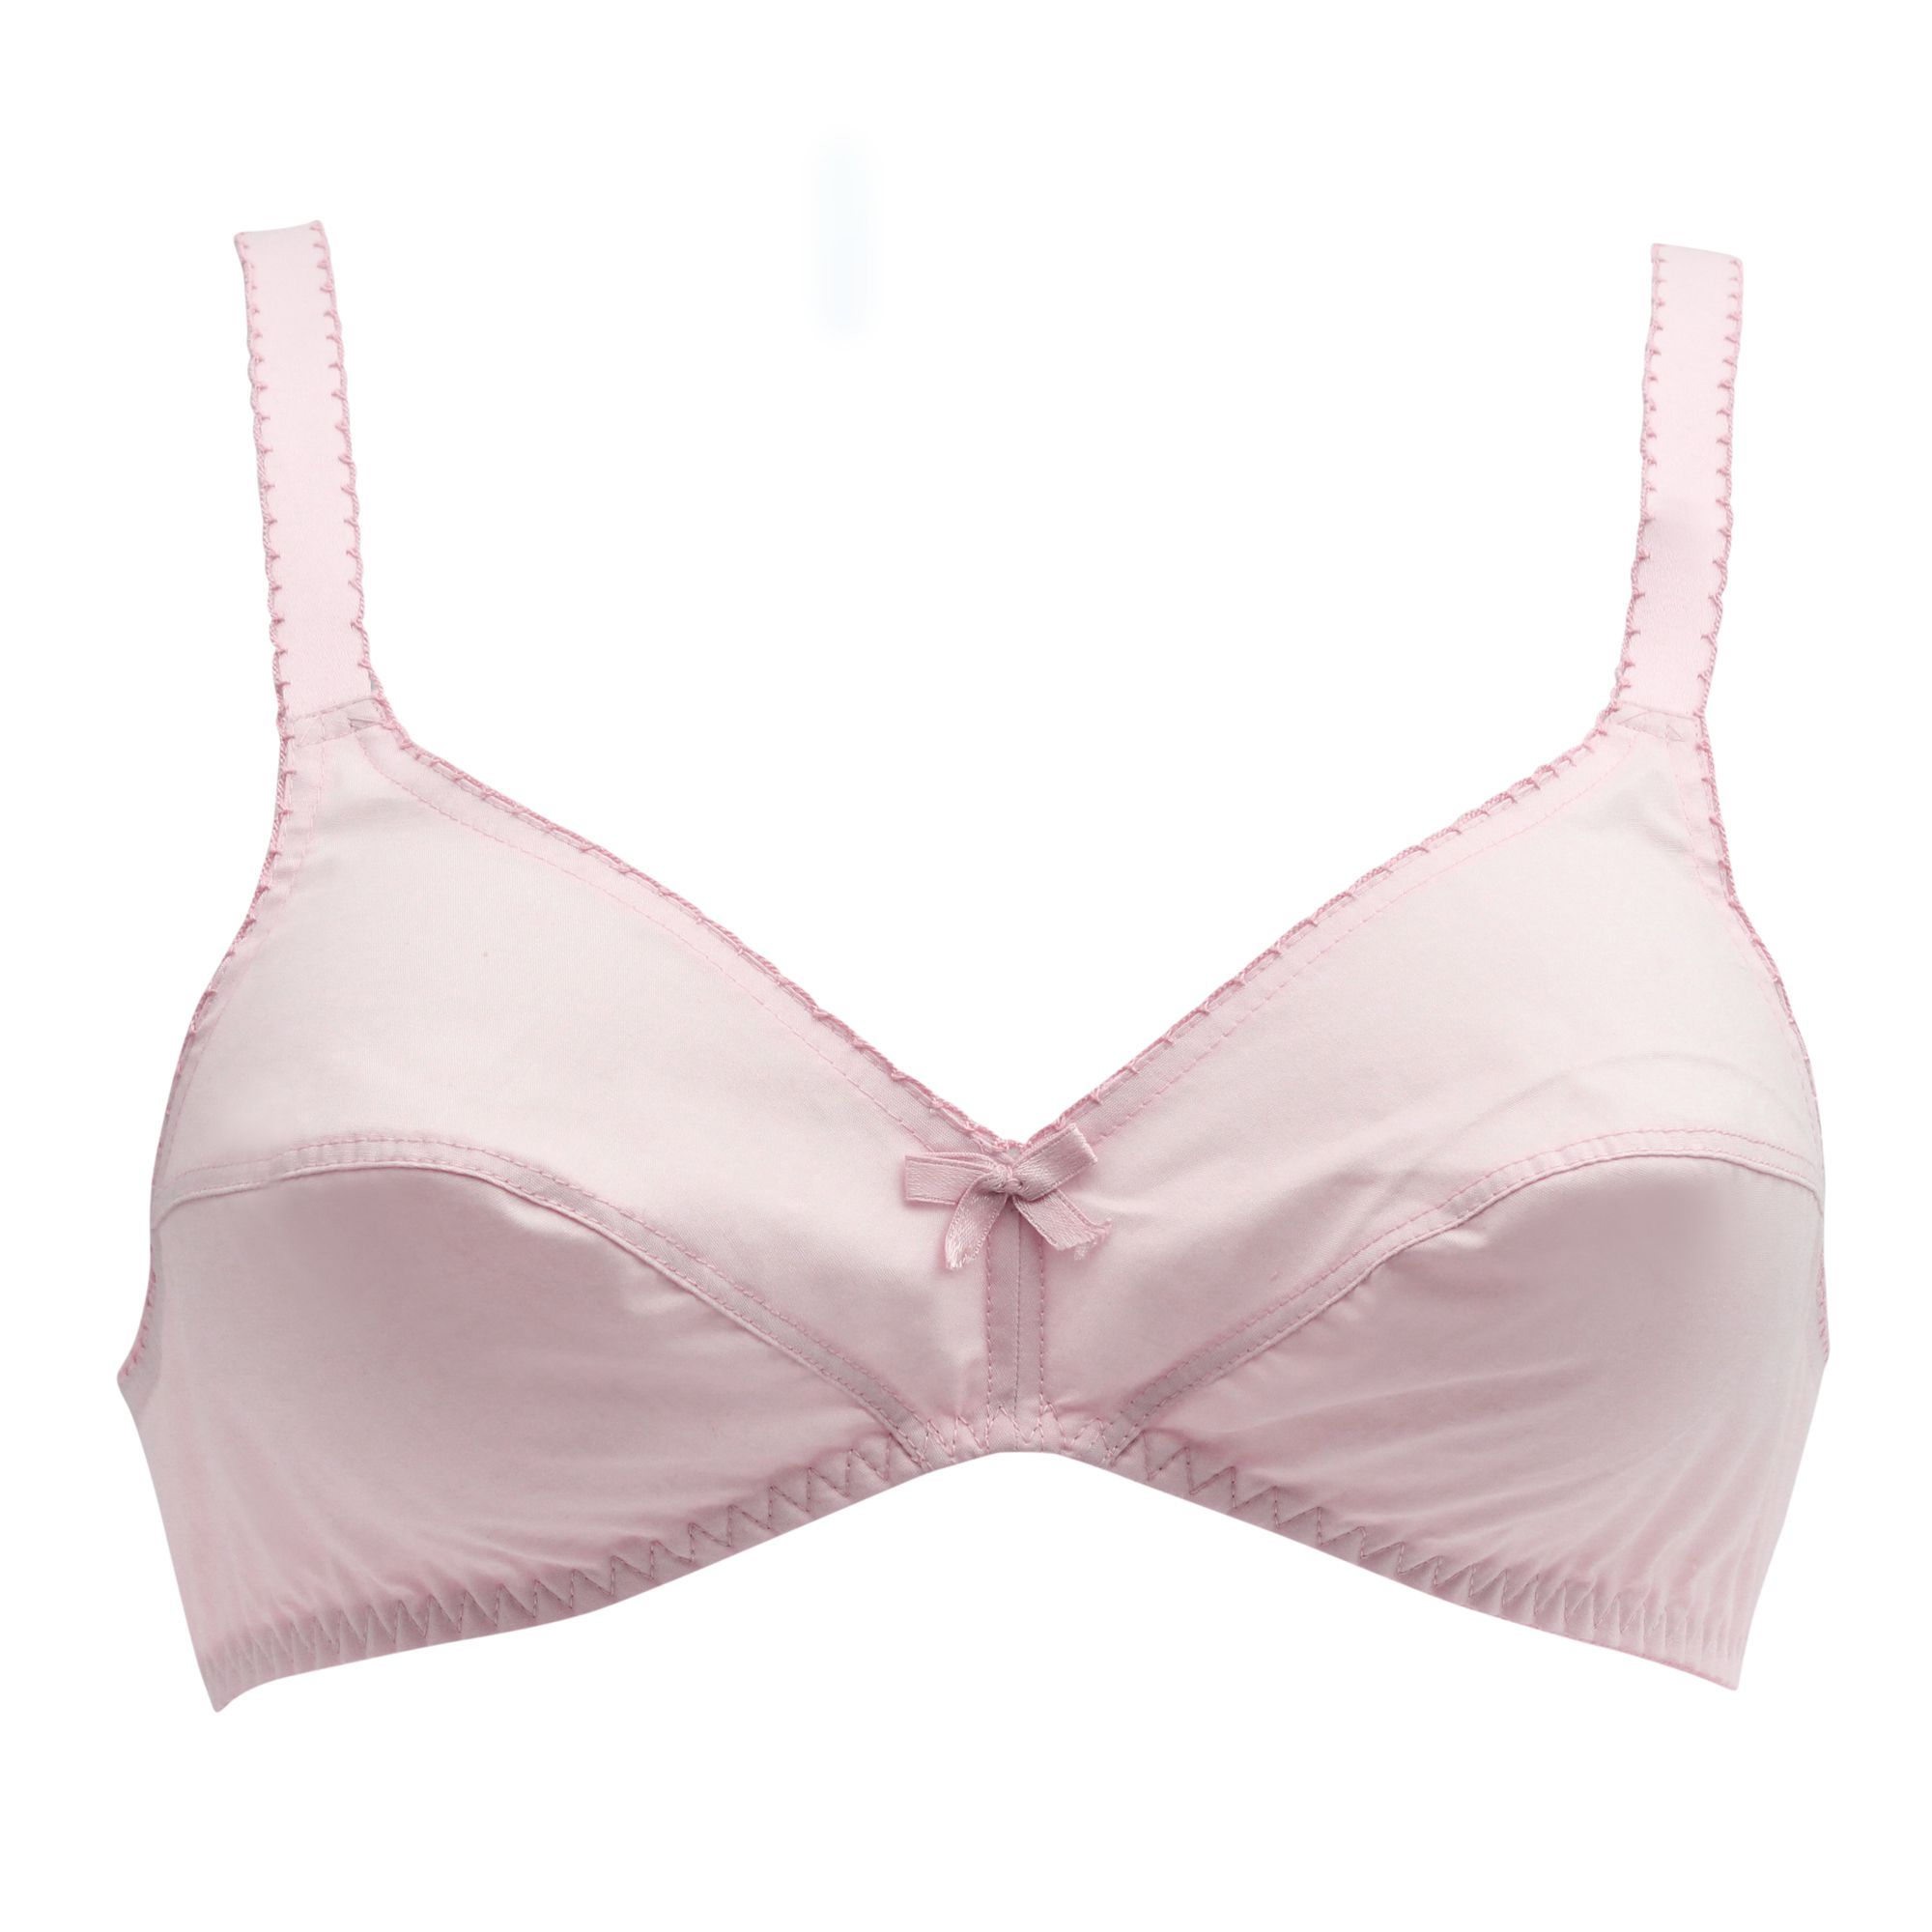 Buy IFG Classic Bra, Vintage Pink Online at Best Price in Pakistan